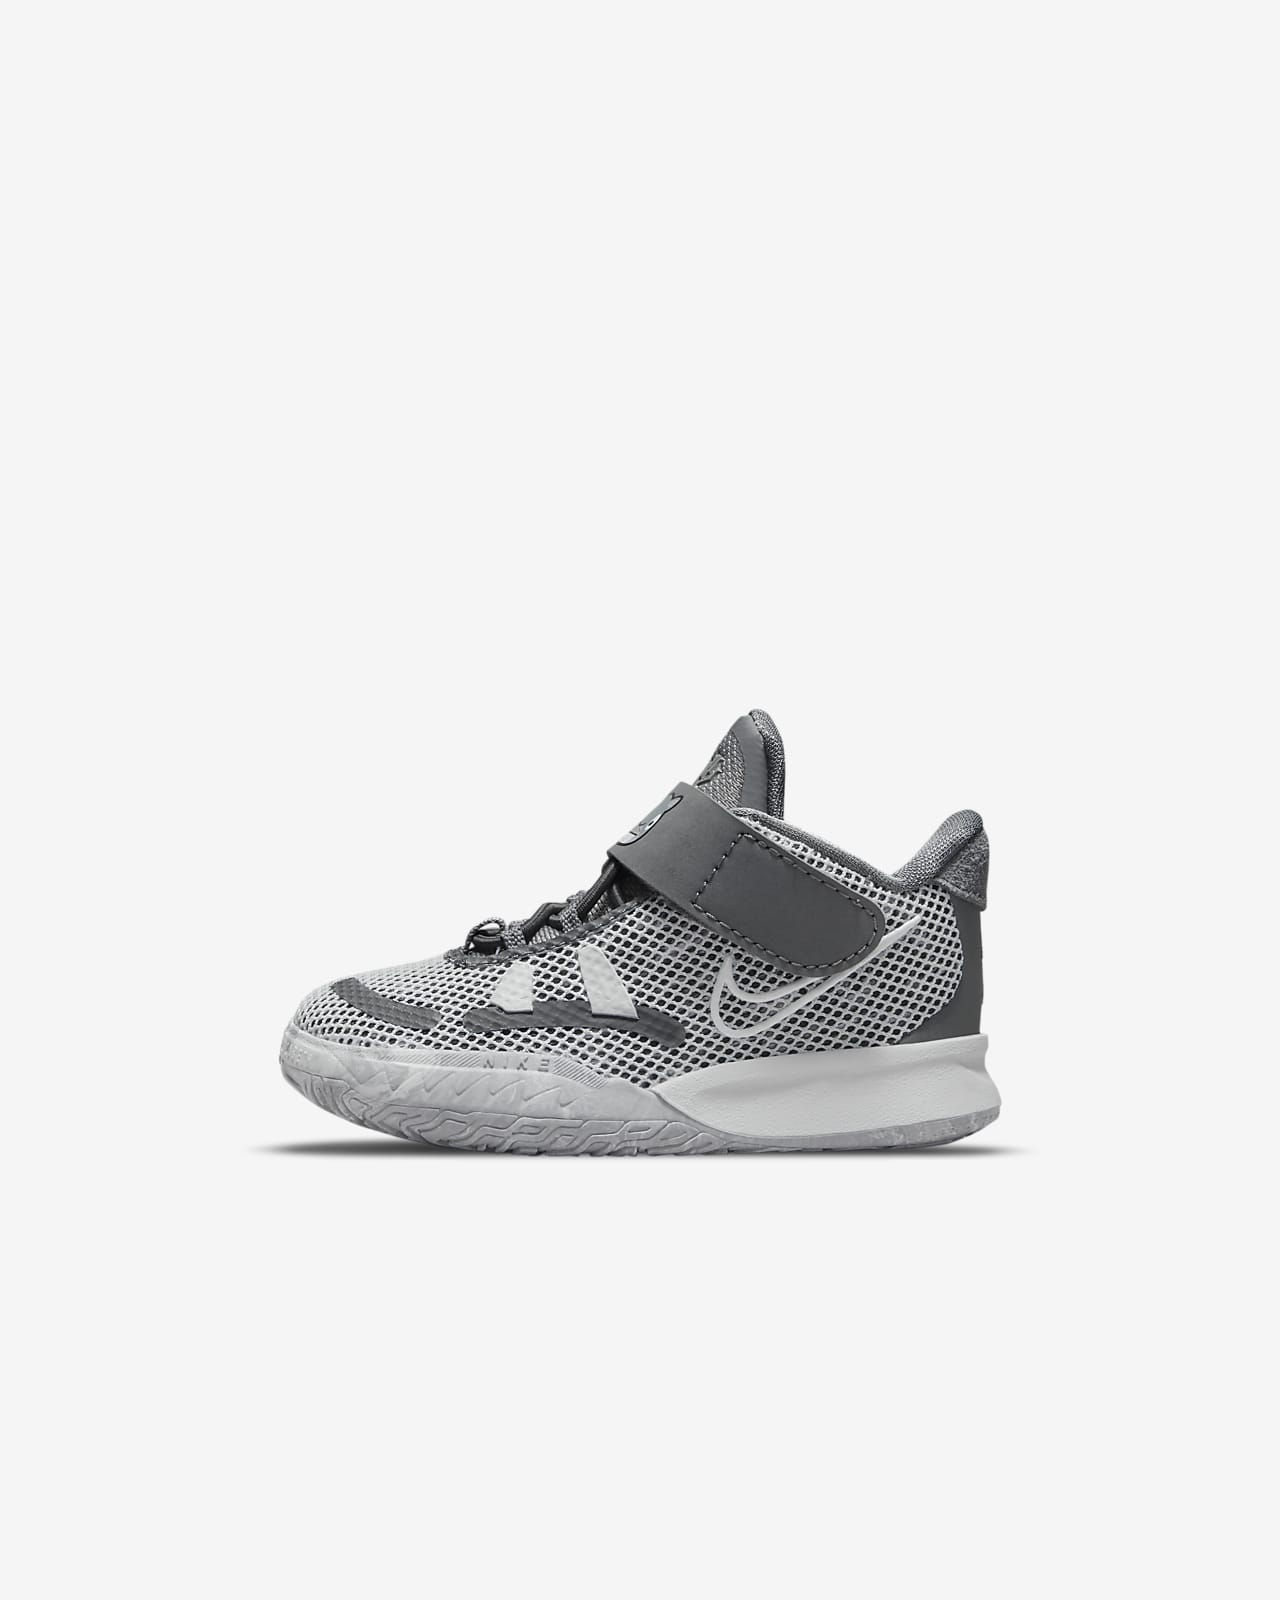 kyrie irving toddler shoes